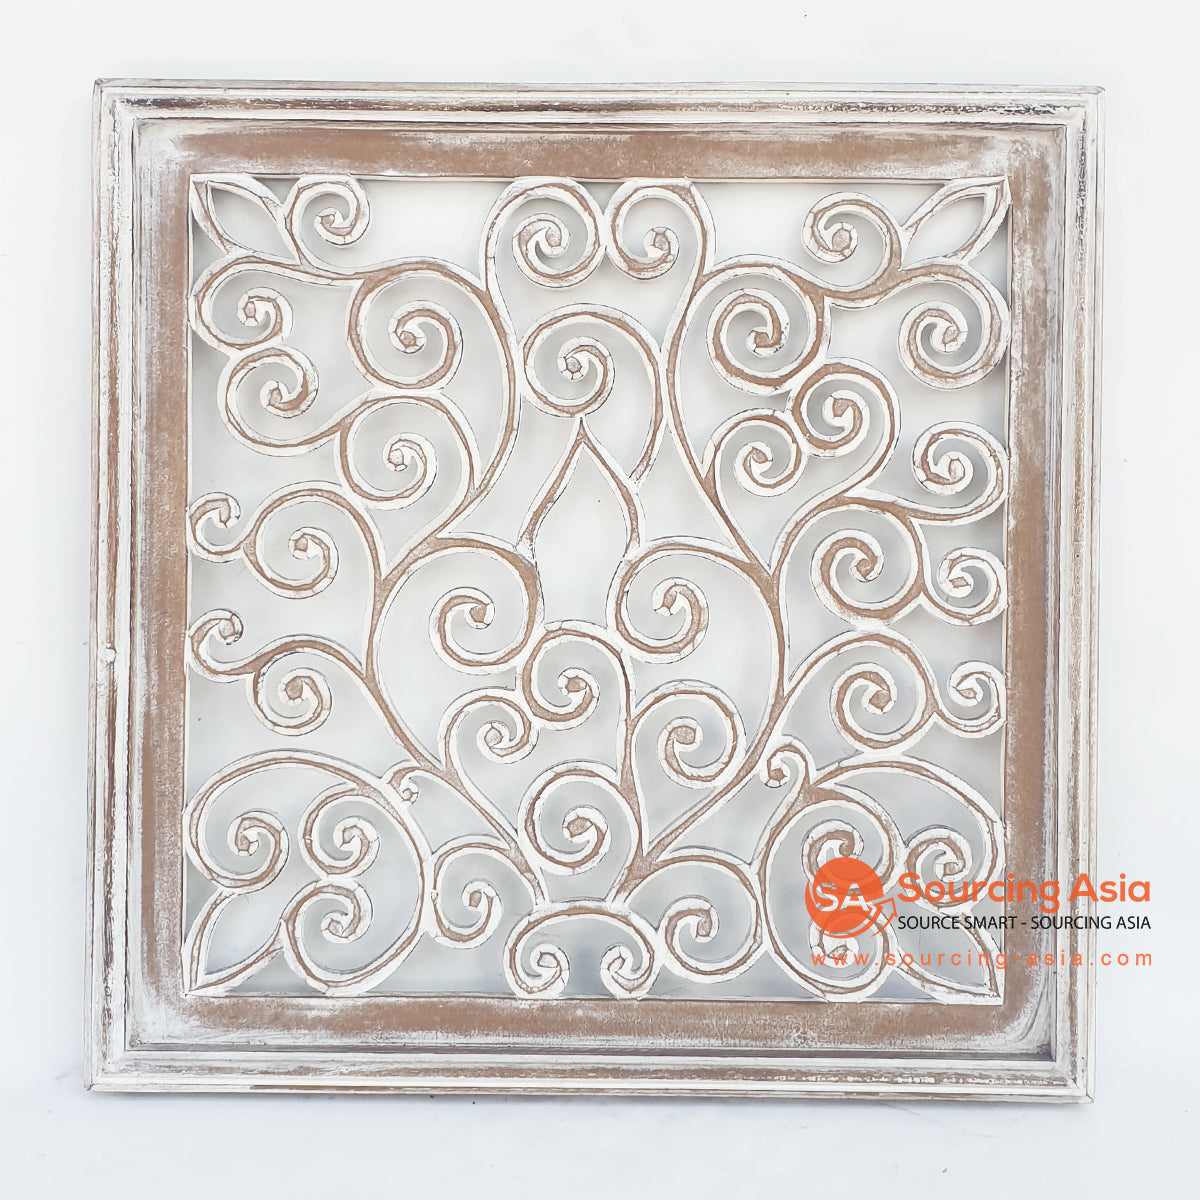 LUHC037-1 WHITE WASH WOODEN SQUARE LEAVES CARVED PANEL